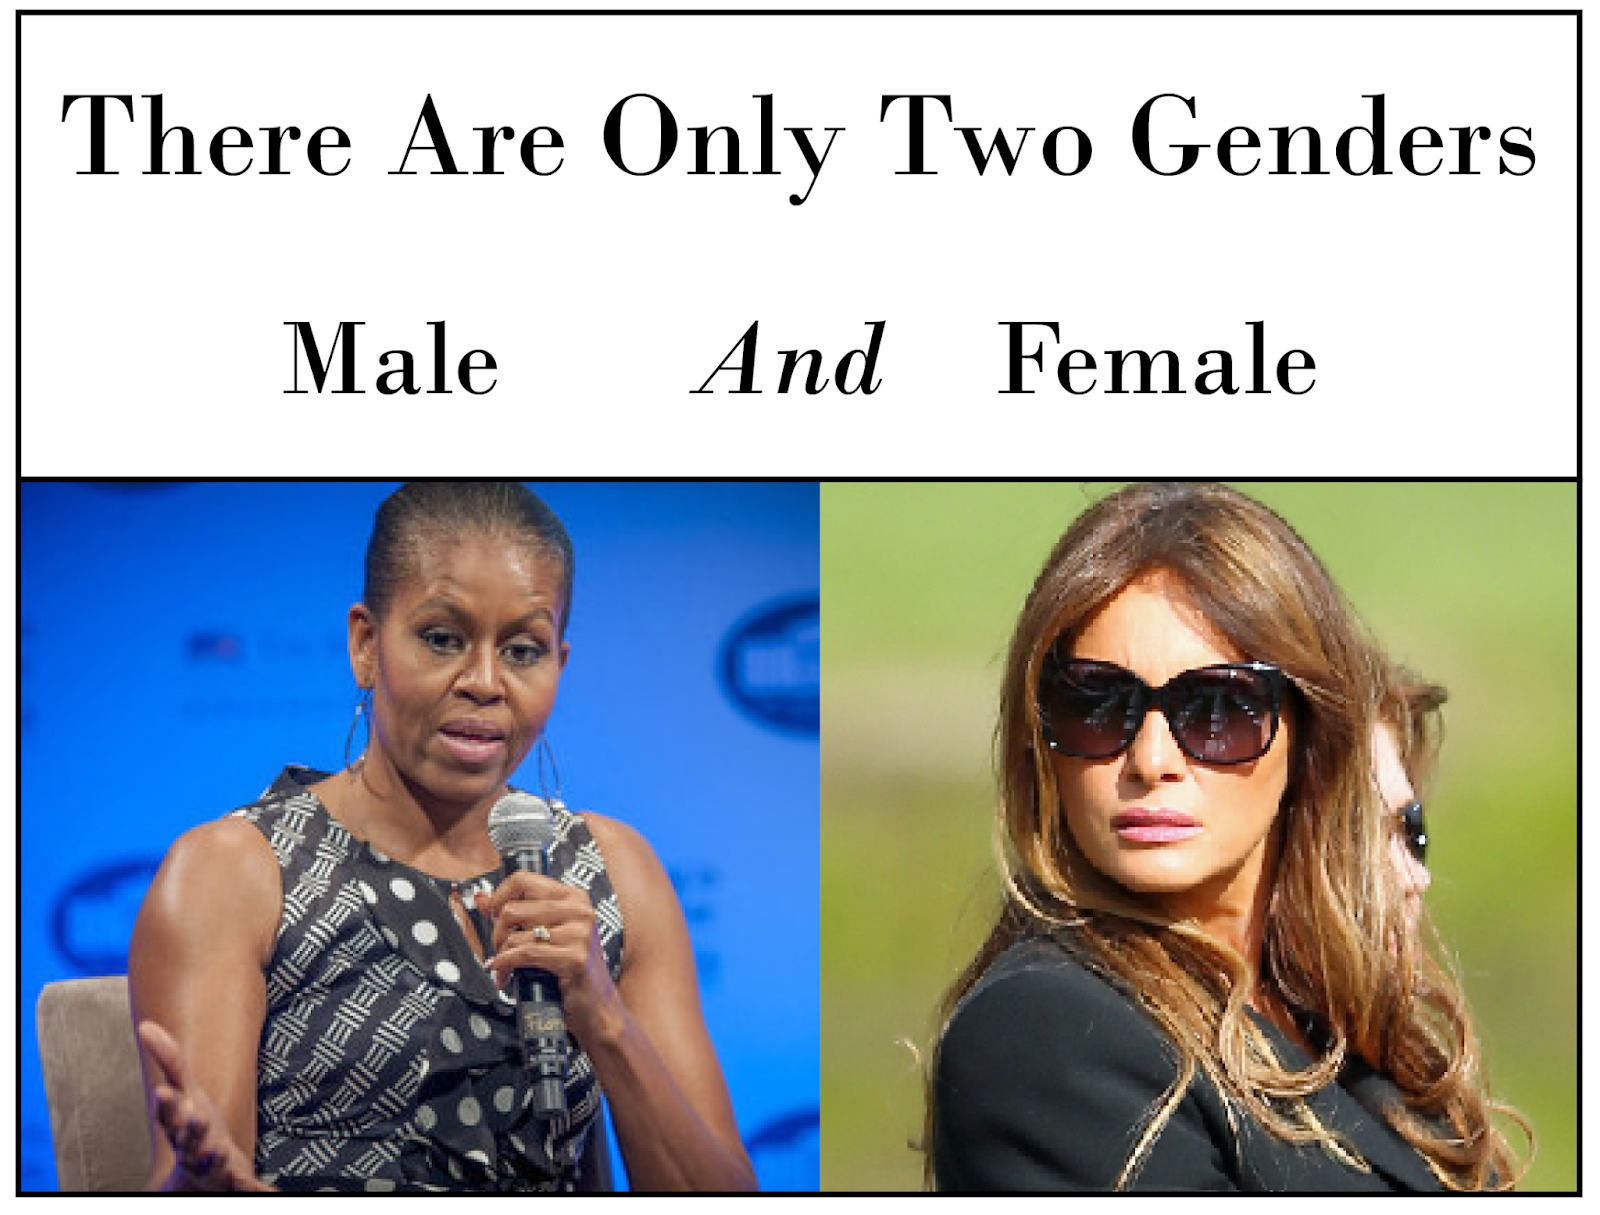 There's Only Two Genders.